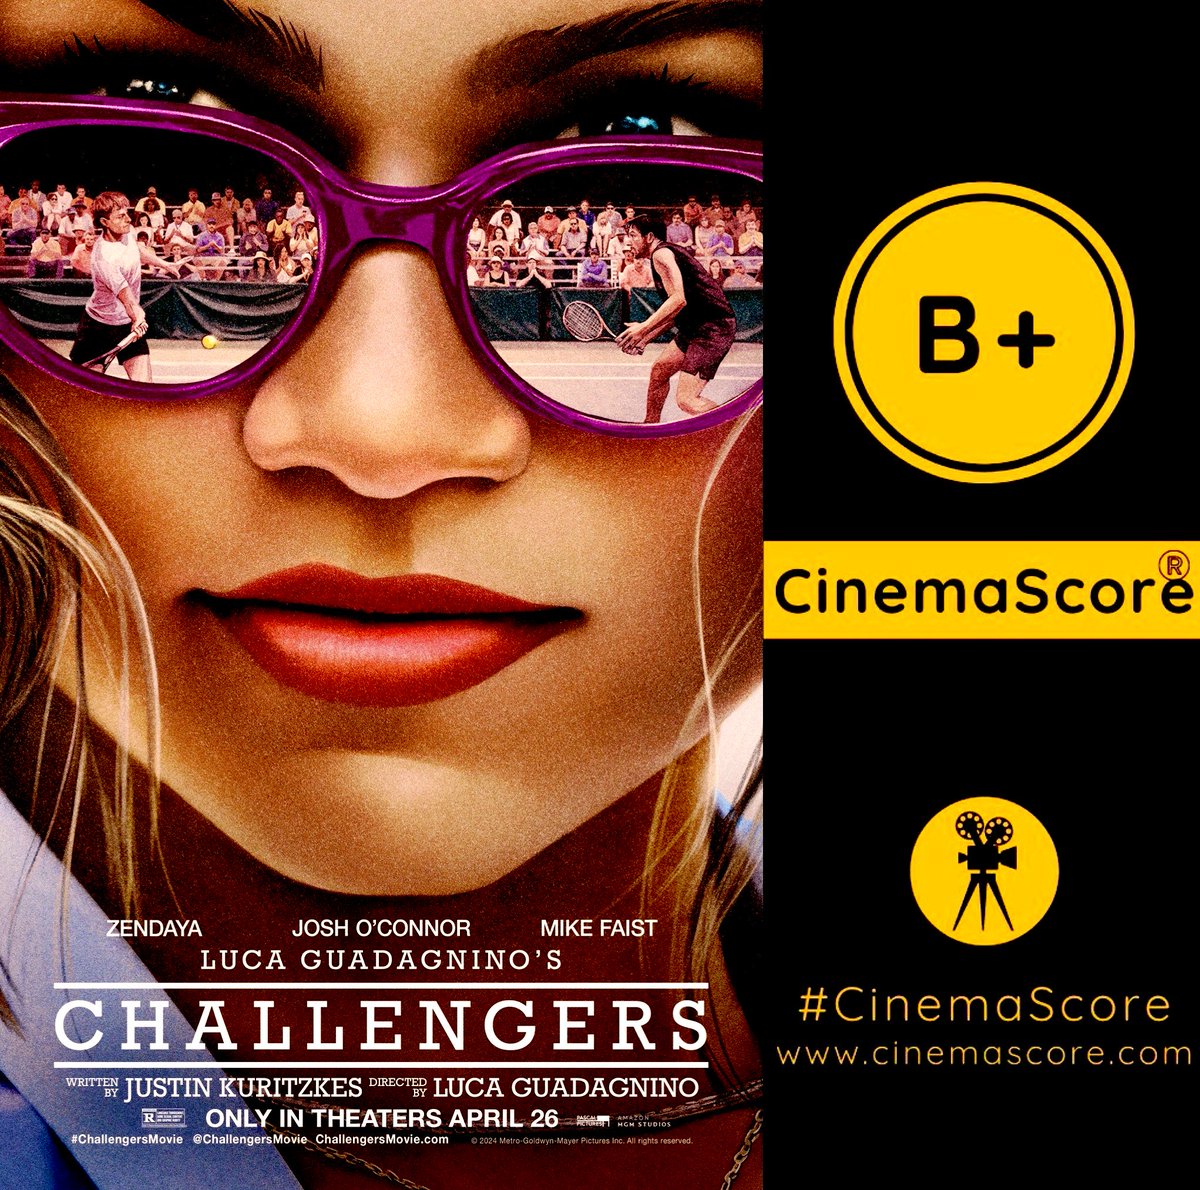 Luca Guadagnino’s ‘CHALLENGERS’ receives a B+ CinemaScore. Read our review: bit.ly/ChallengersTHH